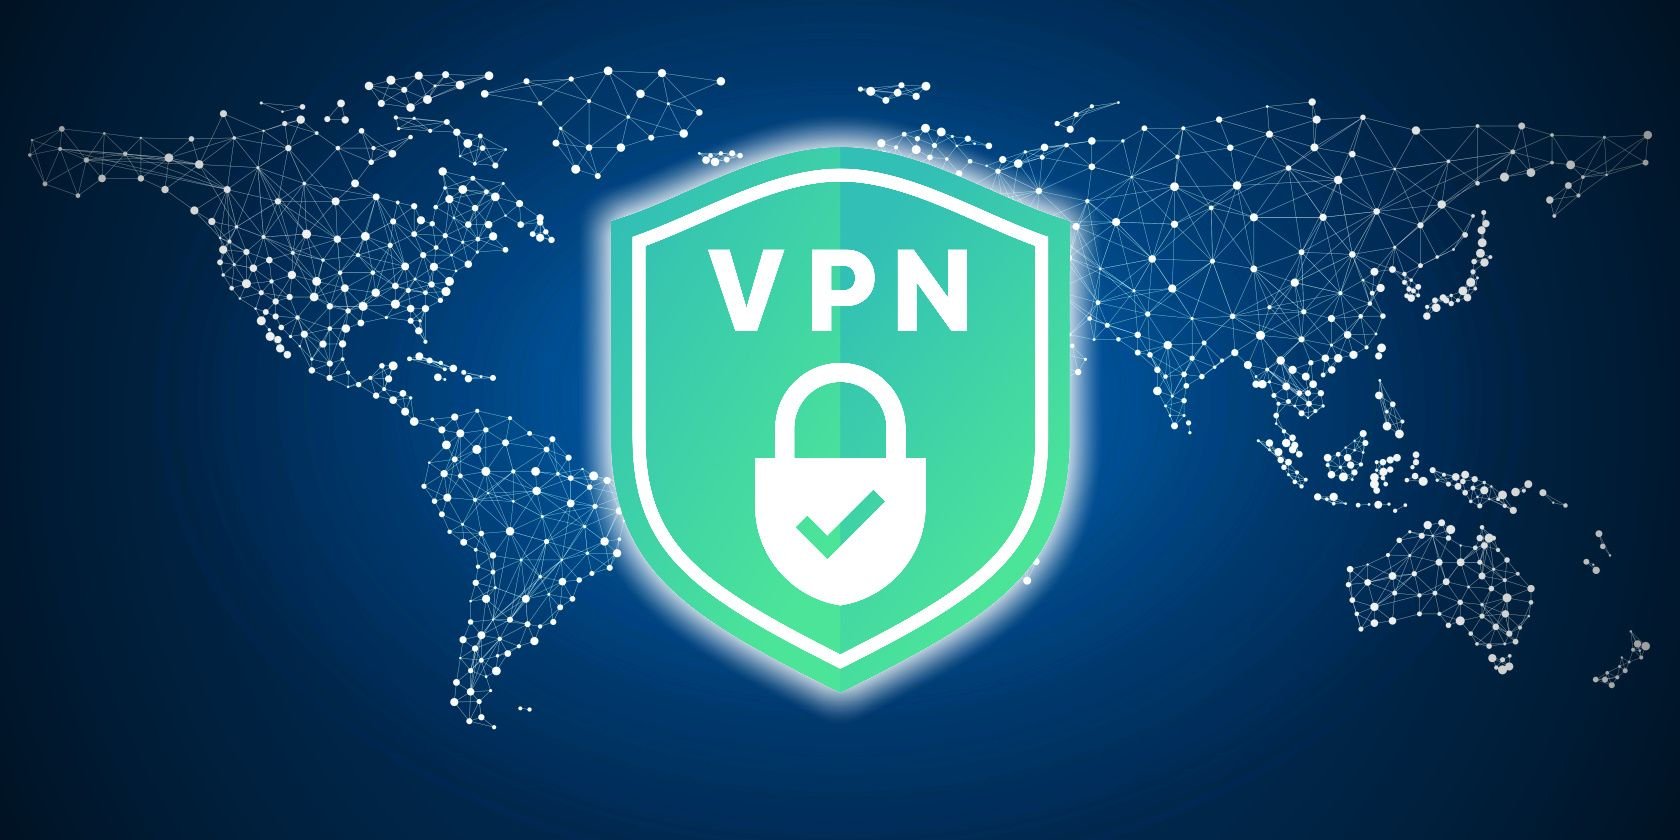 What Is a Decentralized VPN and How Does It Work?